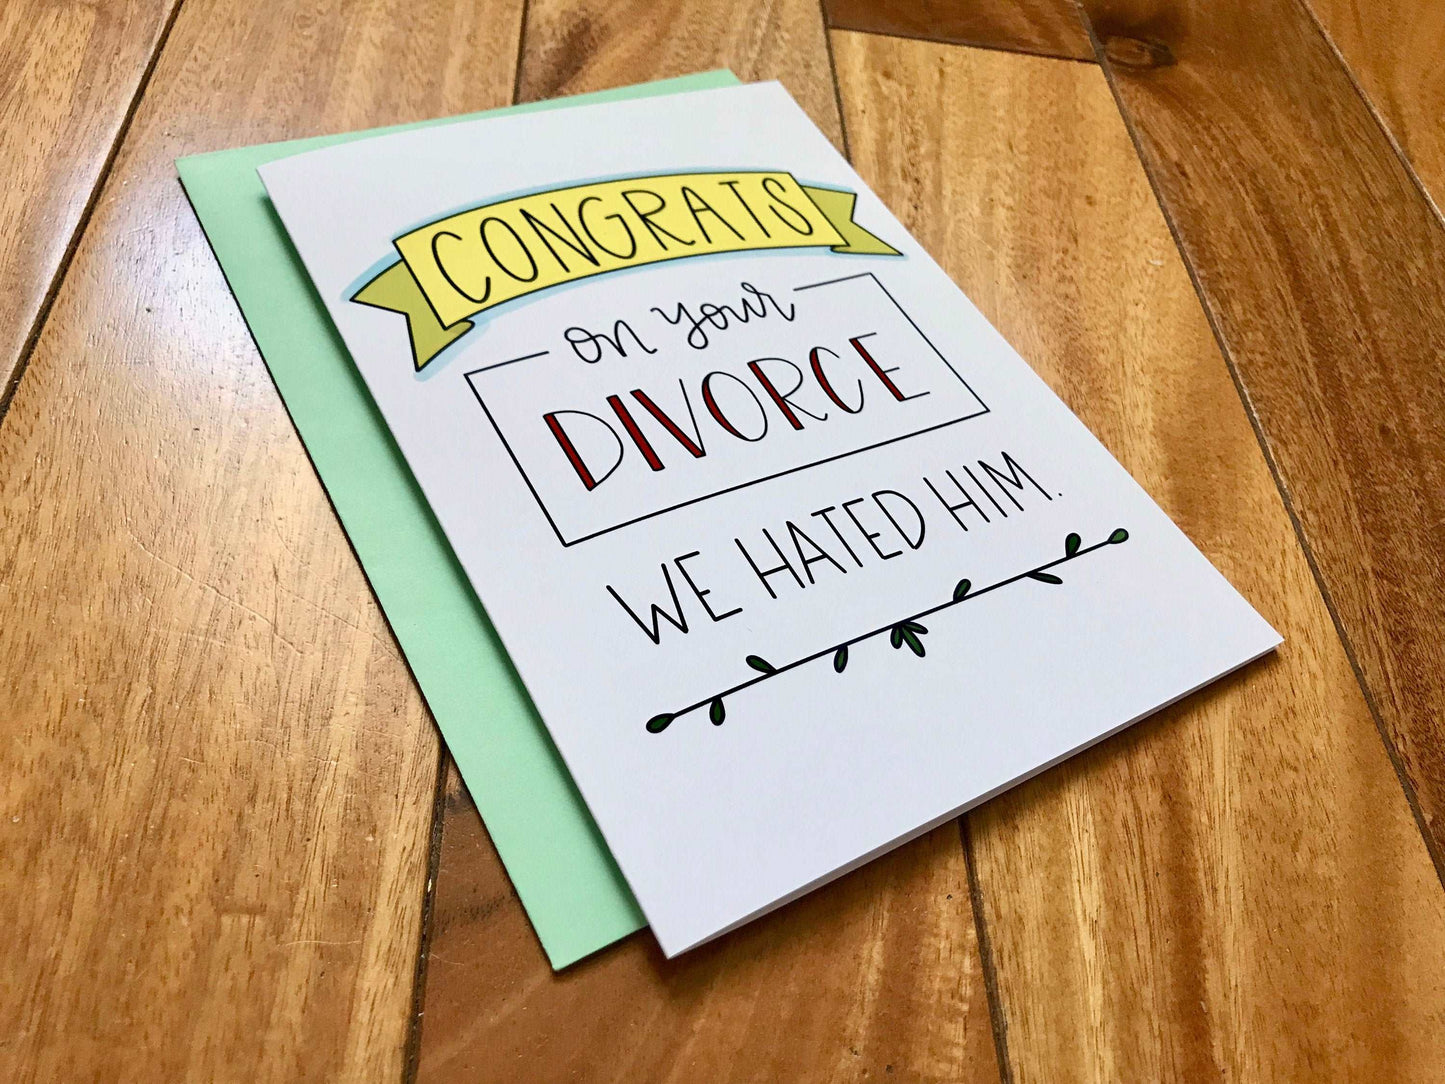 Congrats on the Divorce by StoneDonut Design